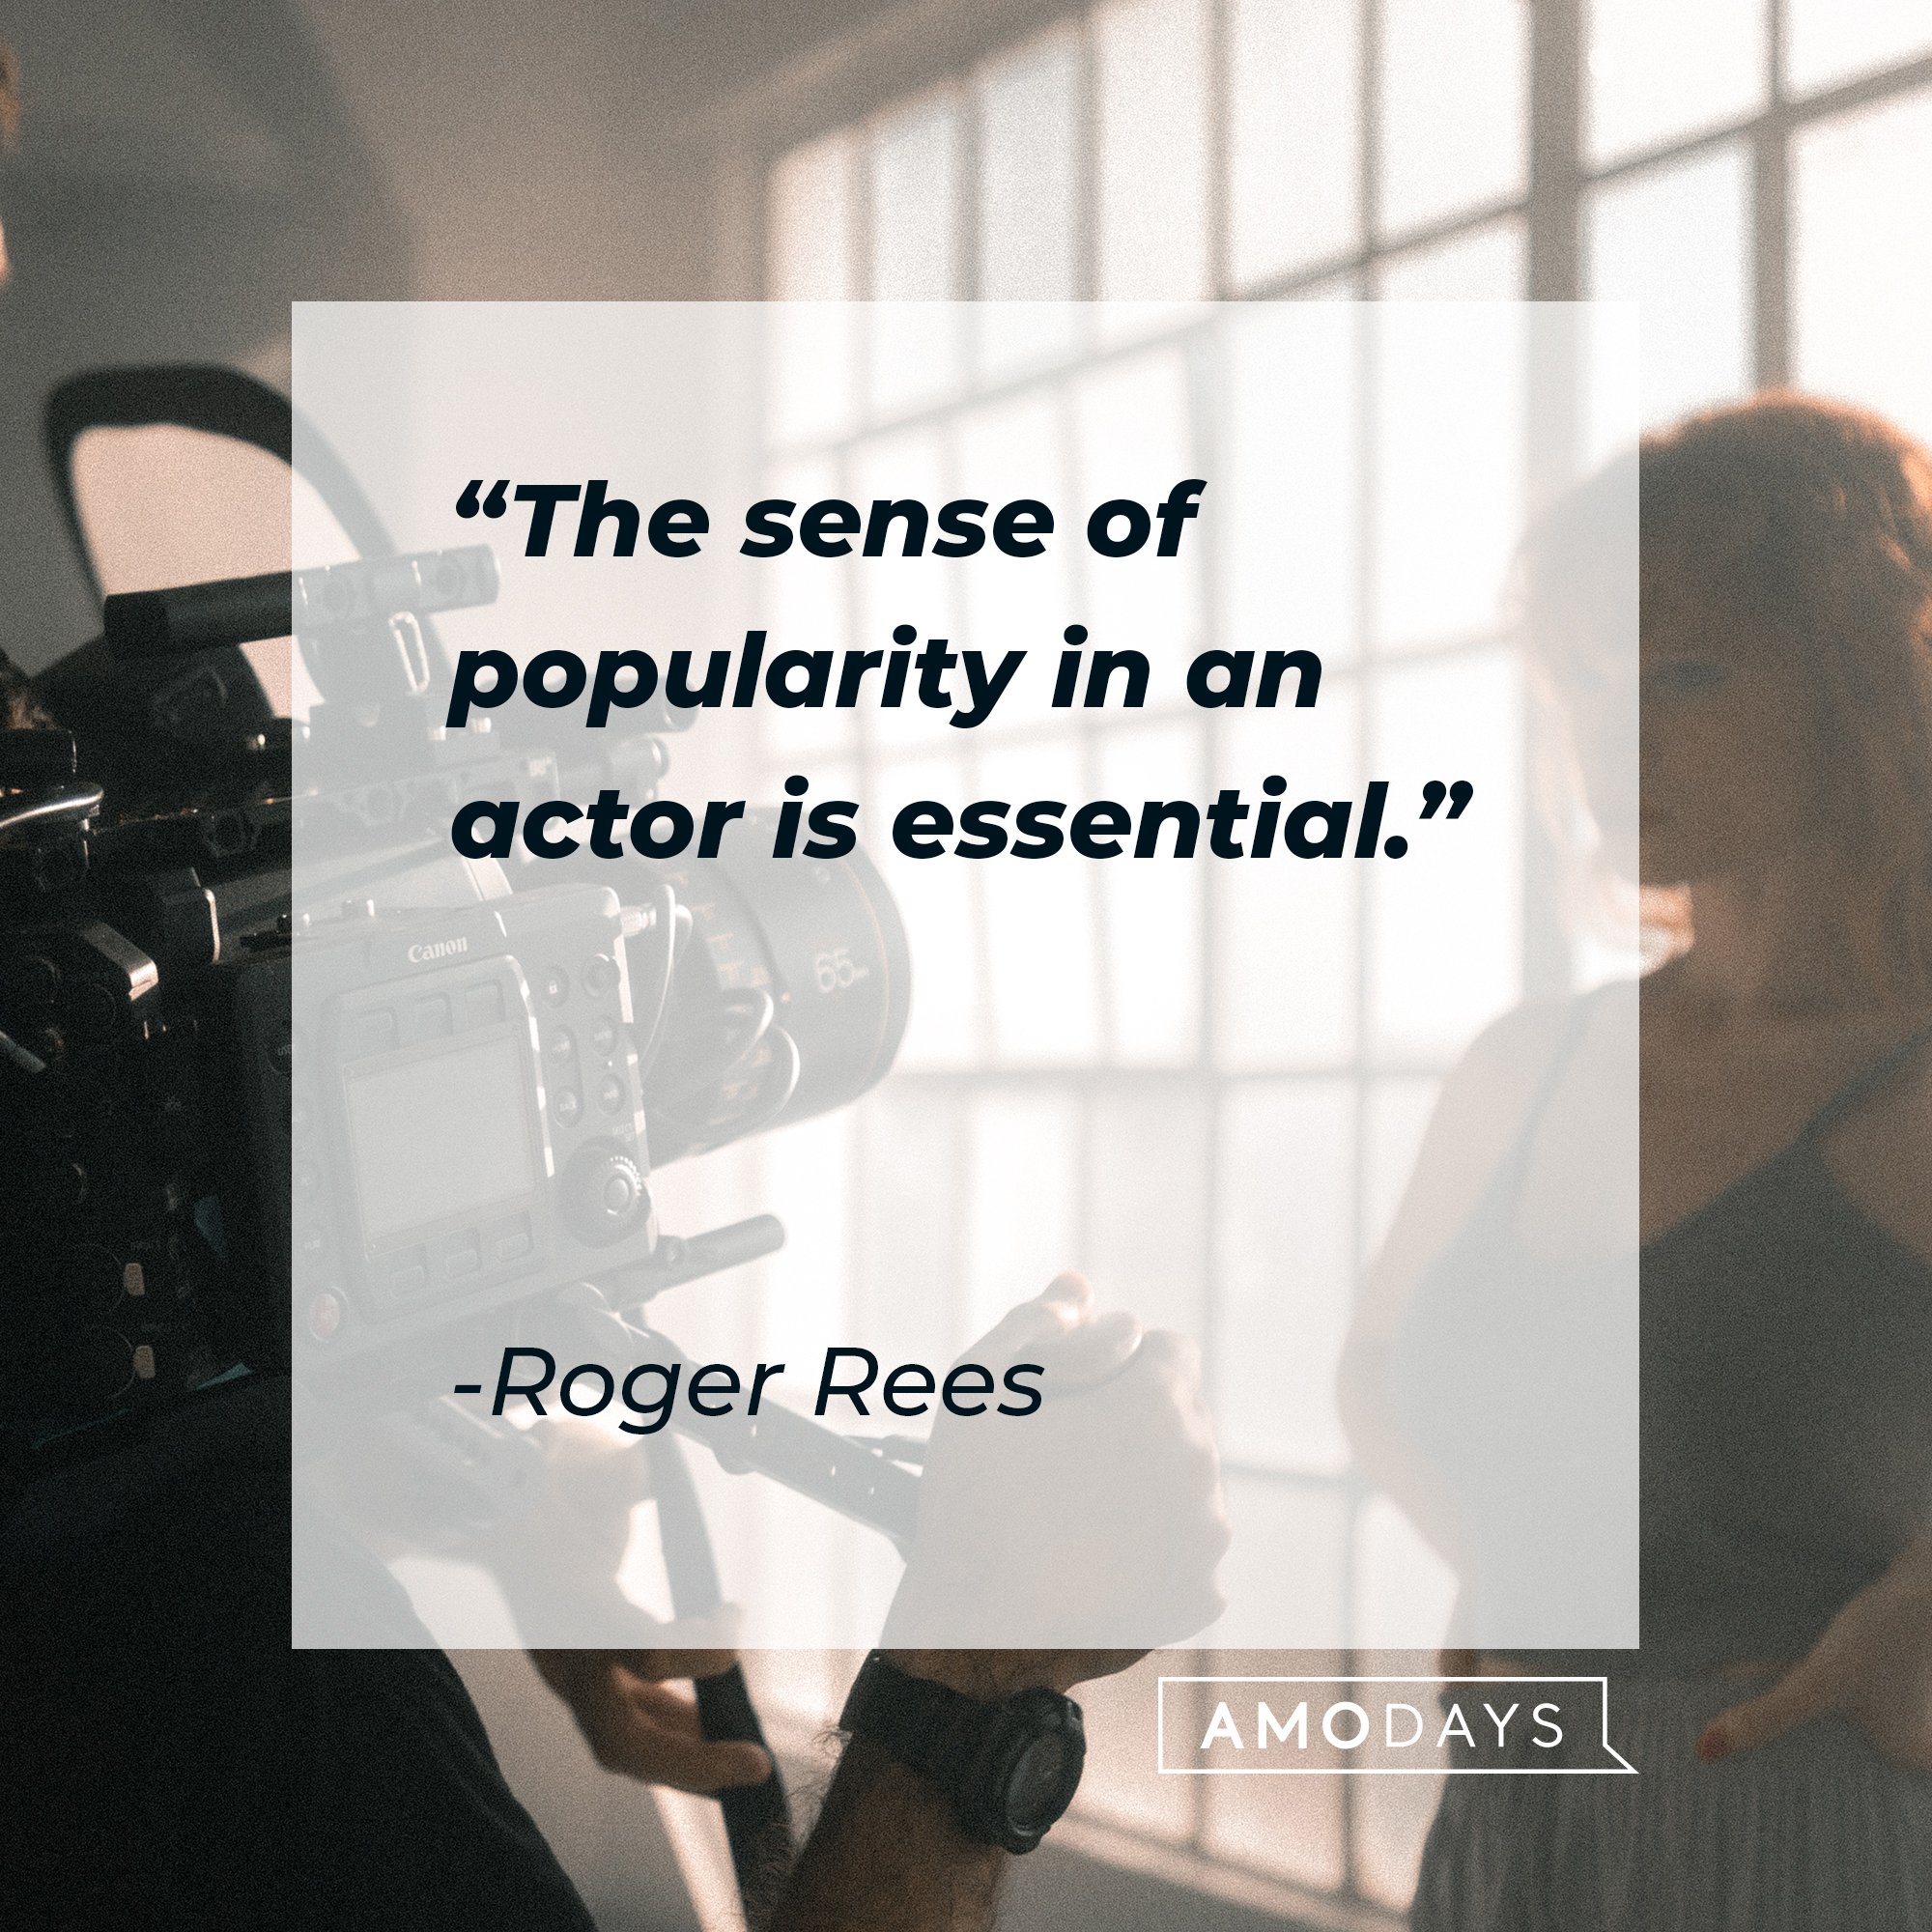 Roger Rees’s quote: “The sense of popularity in an actor is essential.” | AmoDays